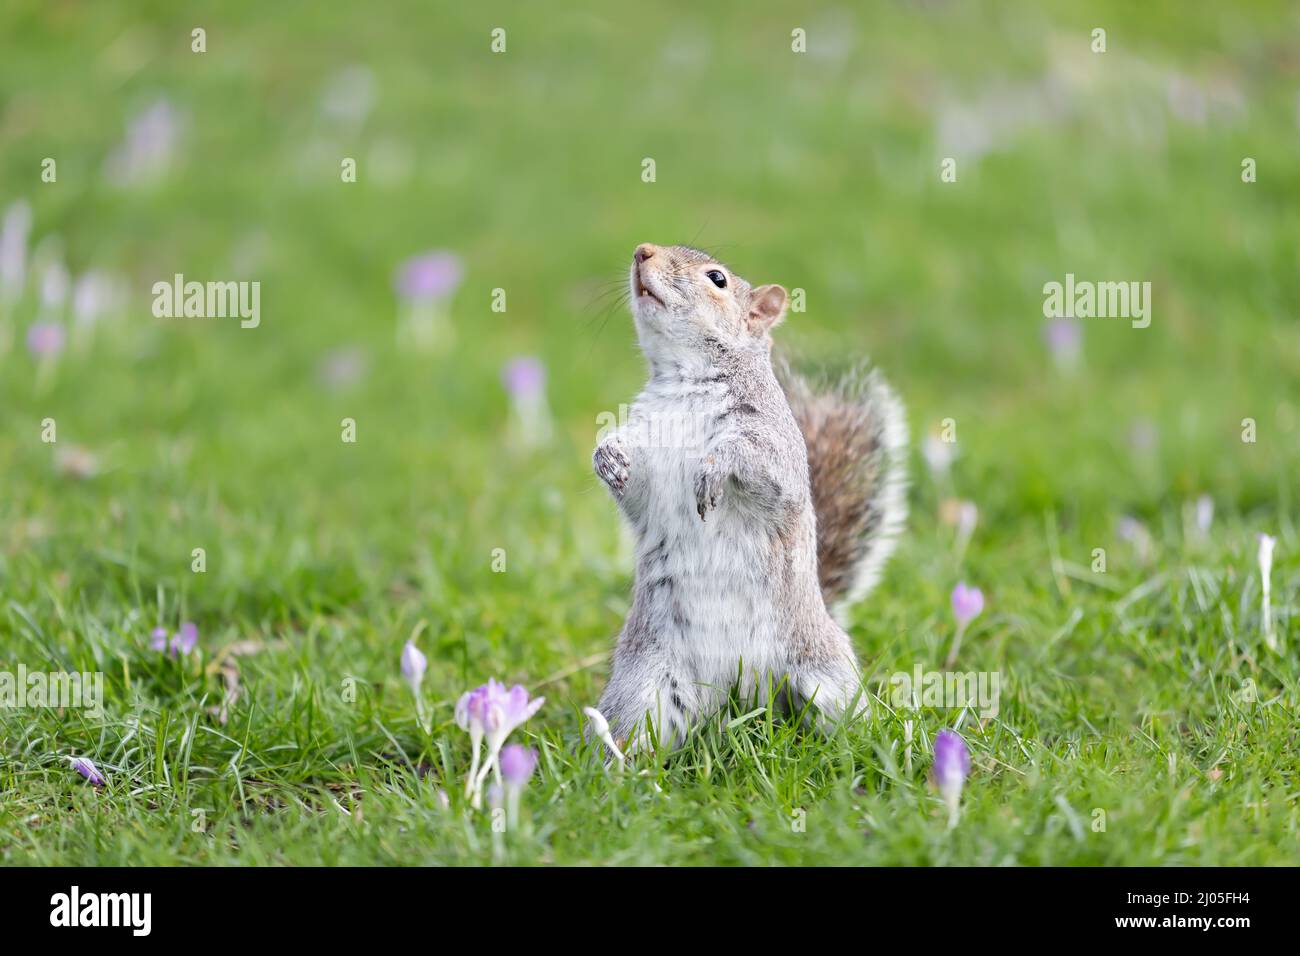 Close up of an eastern grey squirrel  standing up on its hind legs in green grass with crocus, UK. Stock Photo